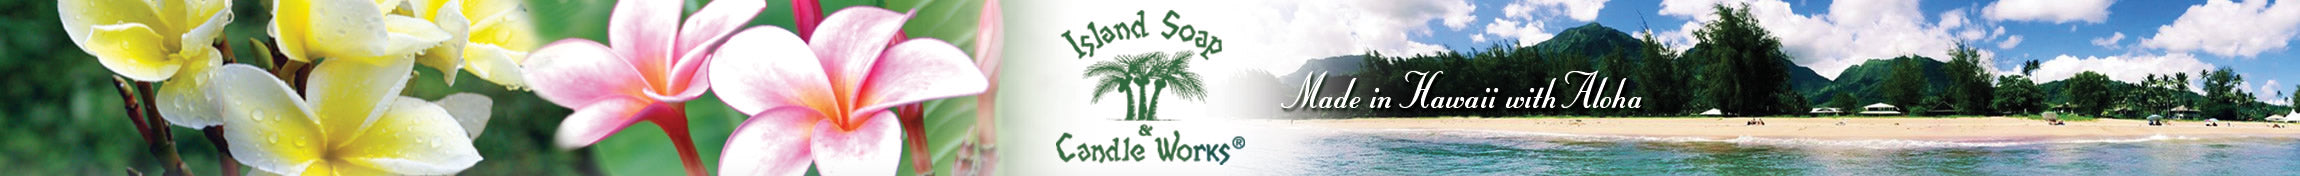 Island Soap and Candle Works